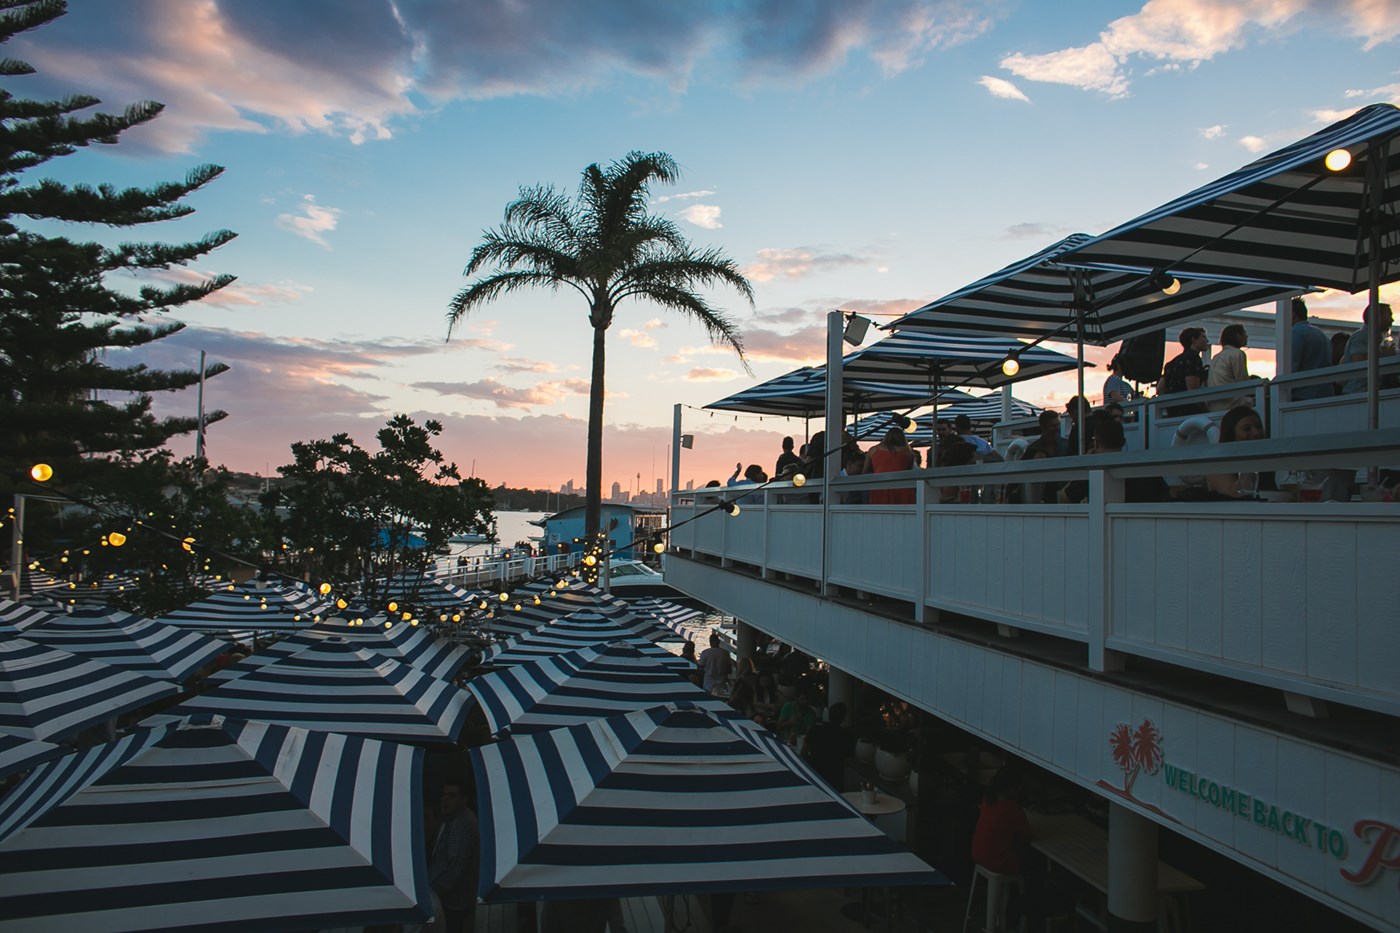 The top deck of wastons bay hotel at sunset dotted with striped umbrellas and palm trees. 